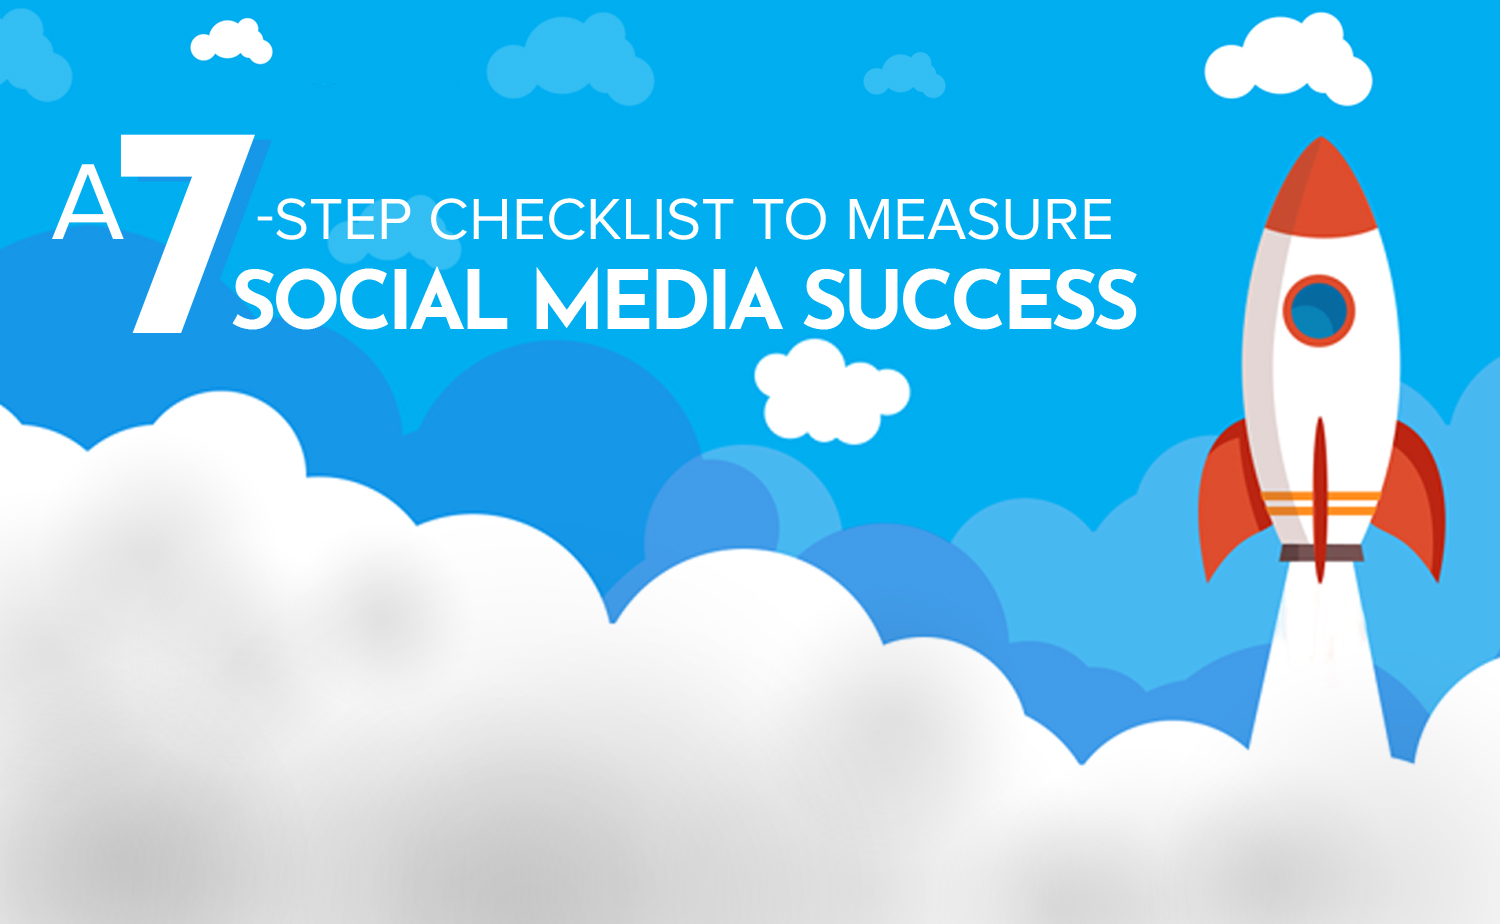 7-Step Checklist to Create a Winning Social Media Strategy [Infographic]